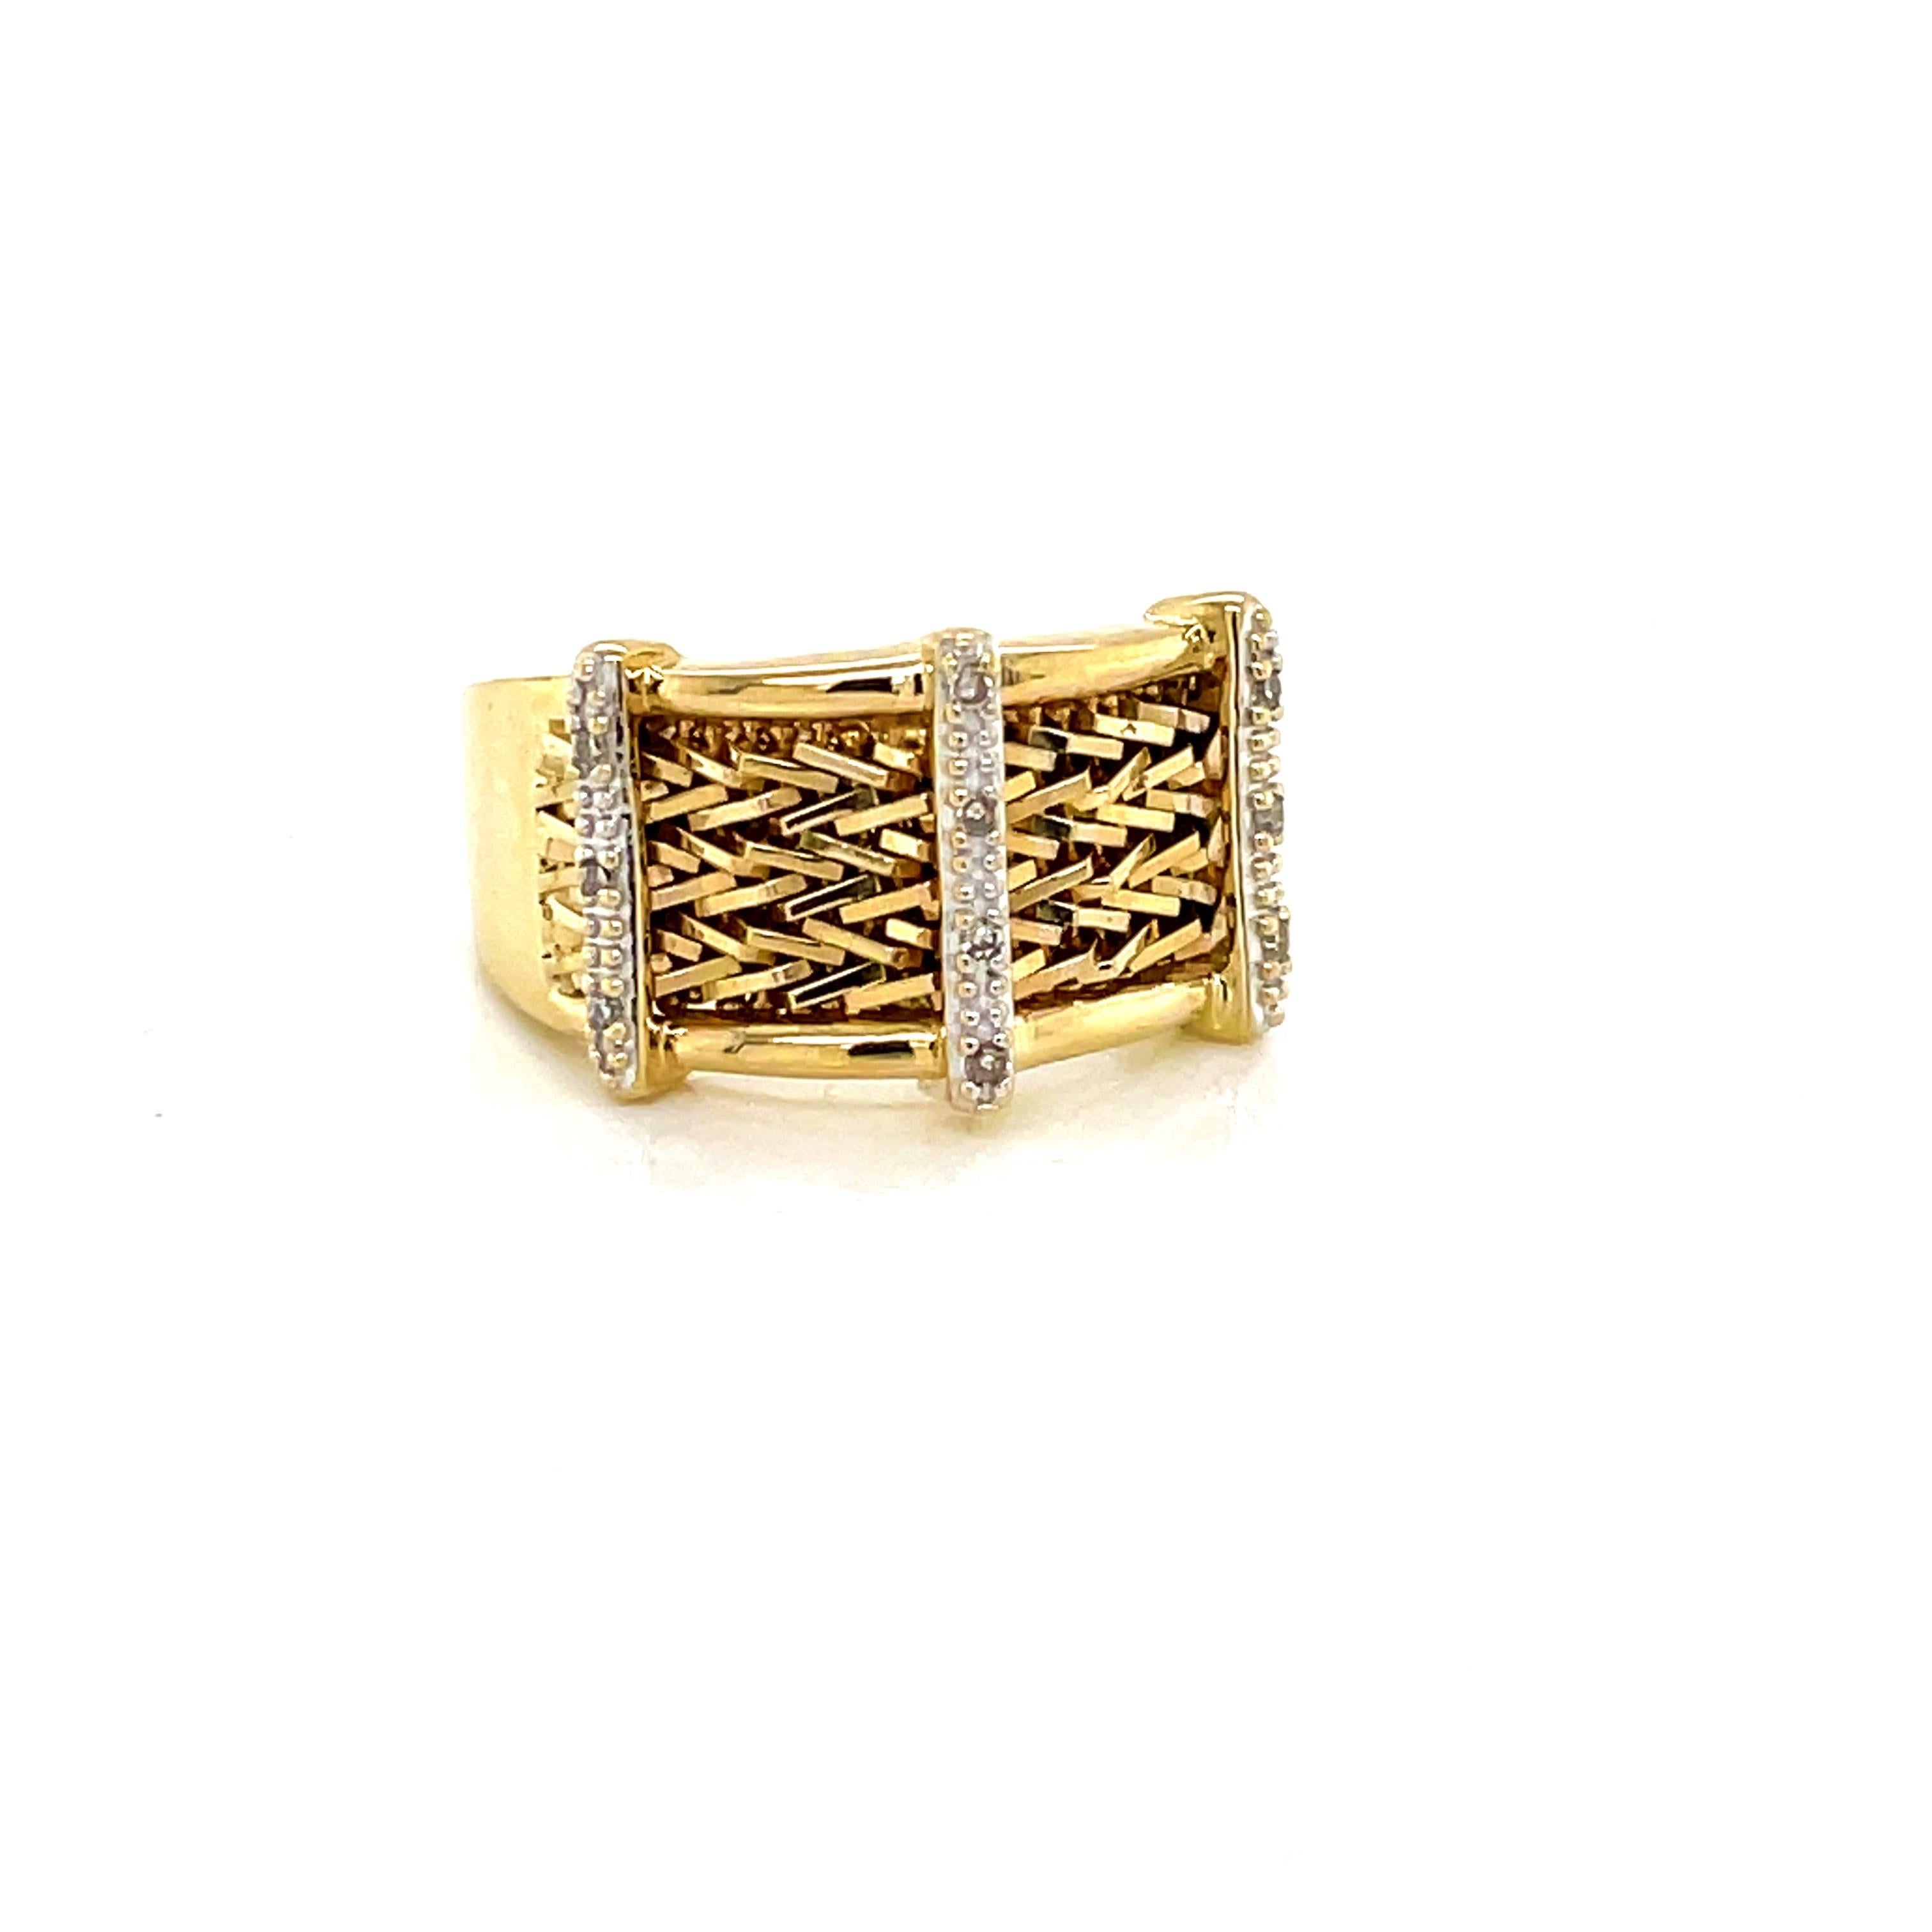 Women's 14 Karat Woven Yellow Gold Band Ring with Diamond Accents For Sale